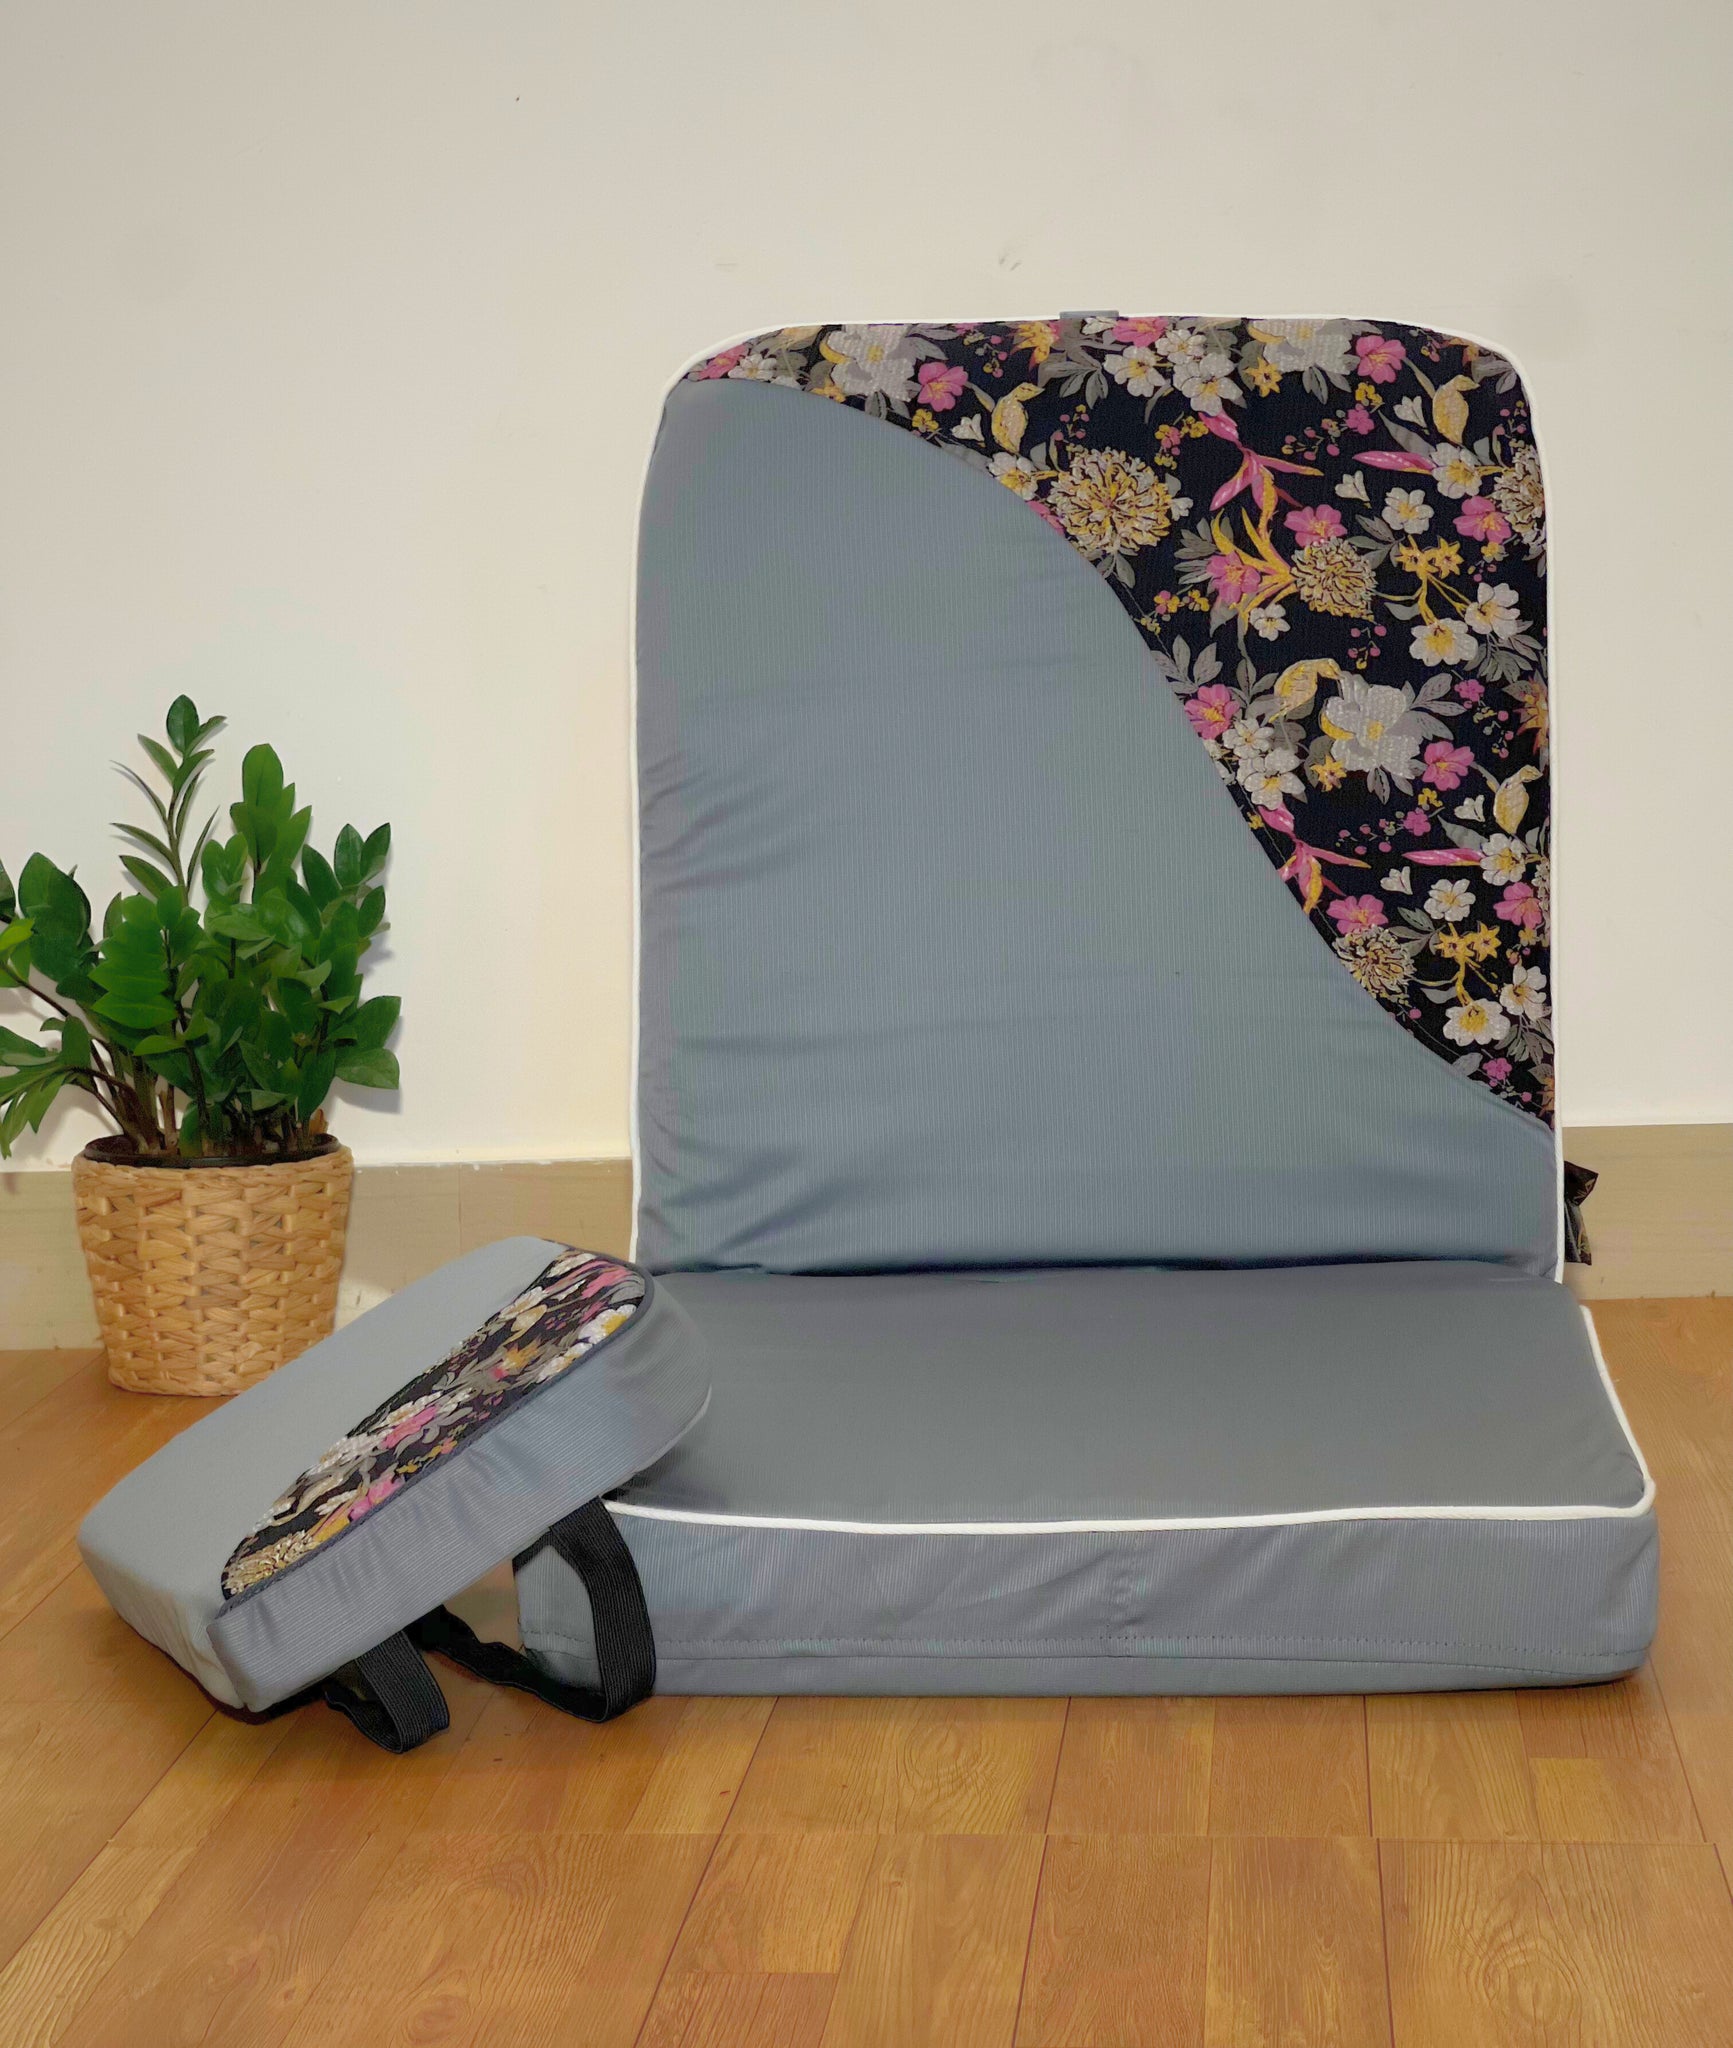 MEDITATION CHAIR WITH CUSHION FOLDABLE LIGHTWEIGHT PORTABLE BACK SUPPO